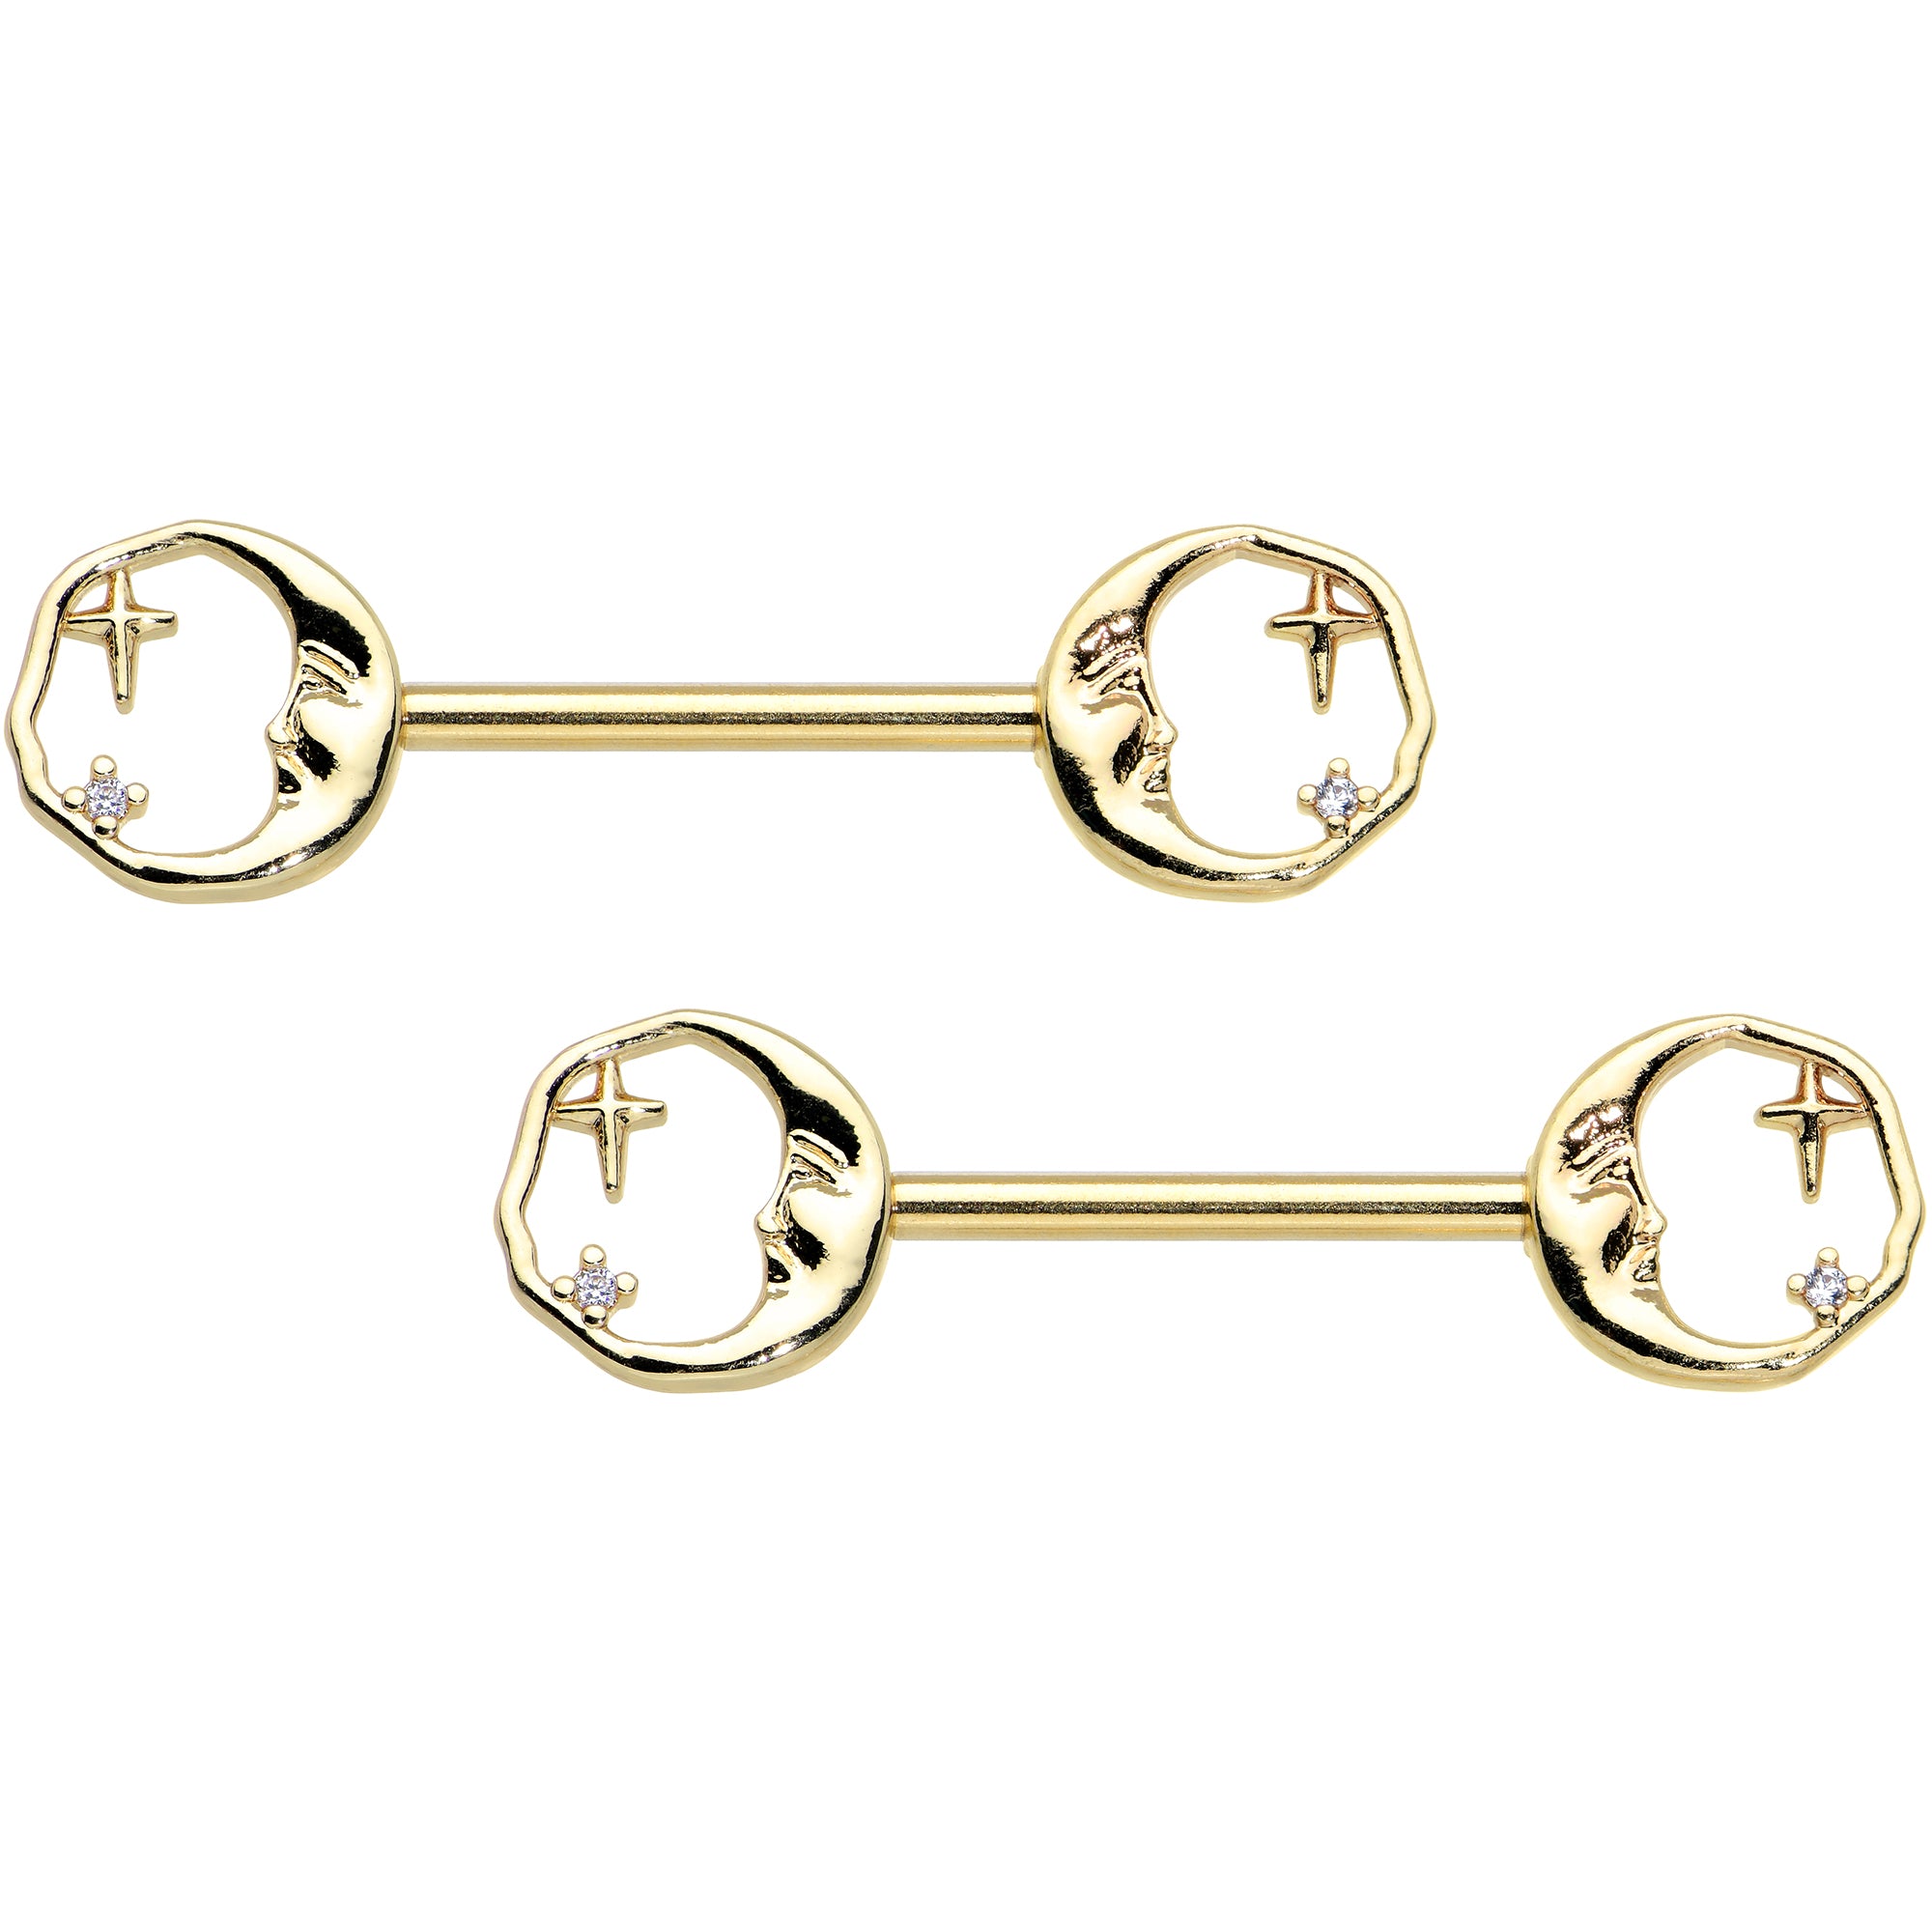 14 Gauge 9/16 Gold Tone Face Crescent Moon Barbell Nipple Ring Set